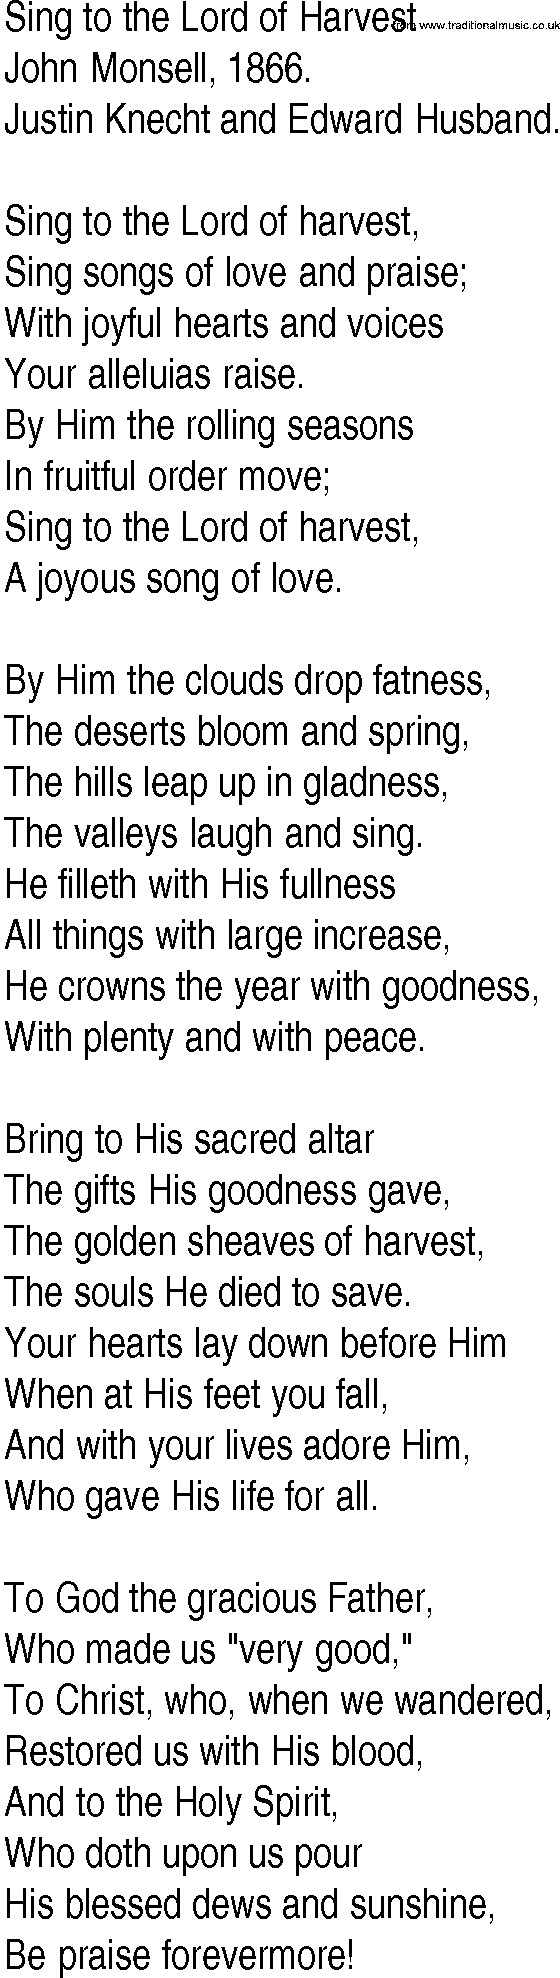 Hymn and Gospel Song: Sing to the Lord of Harvest by John Monsell lyrics